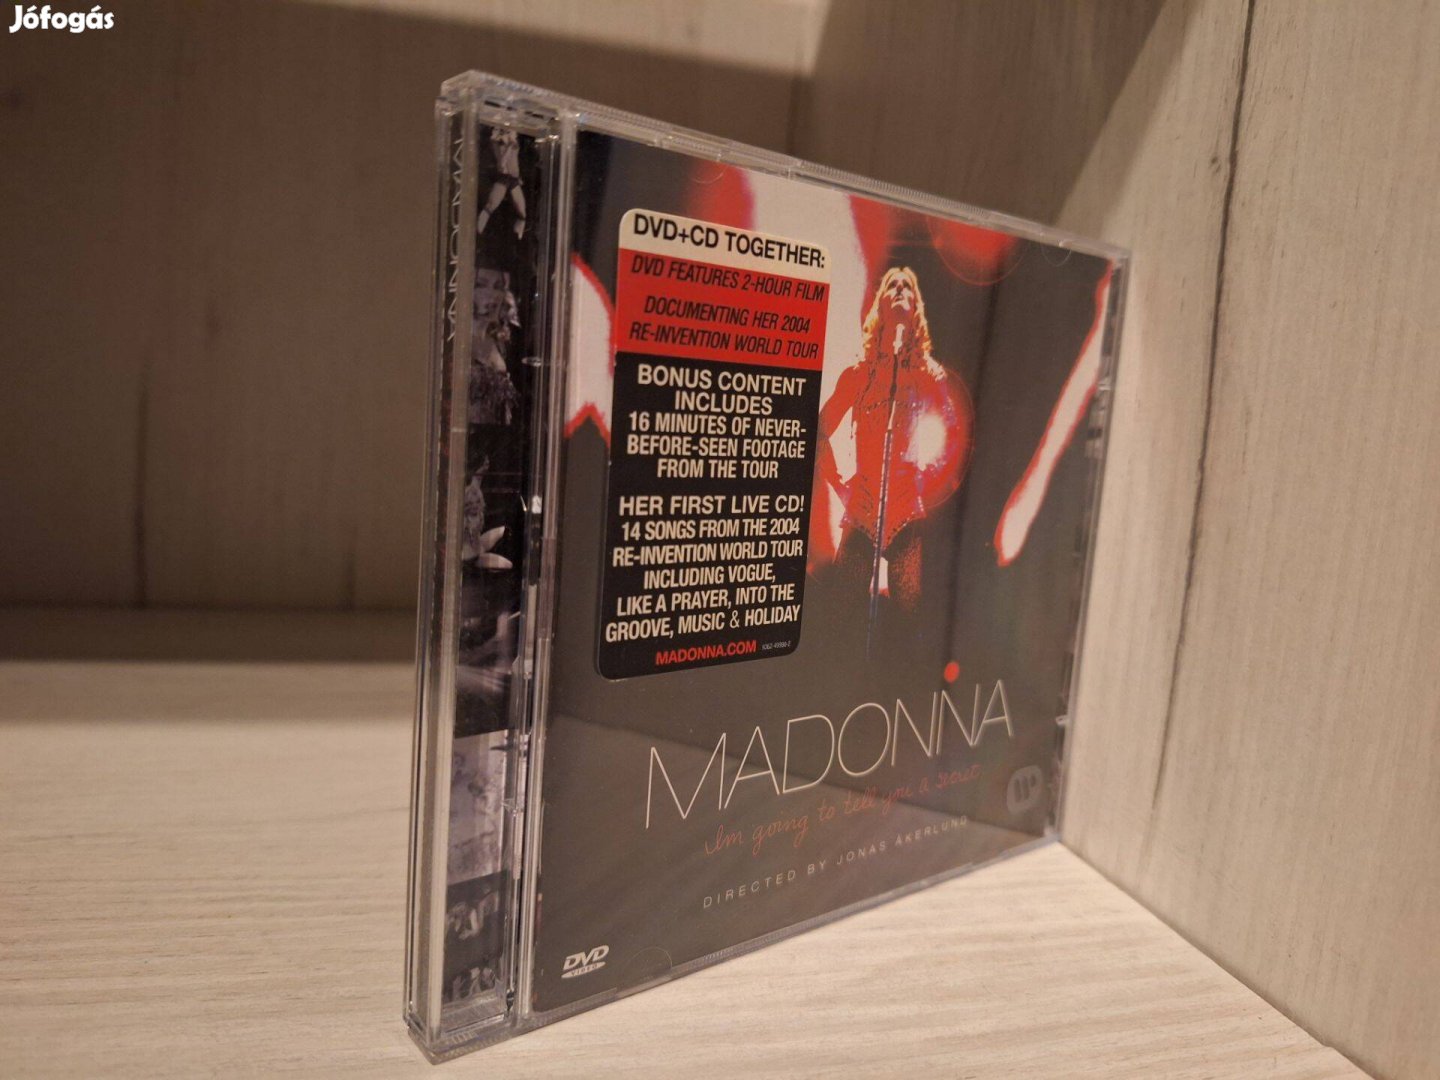 Madonna - I'm Going To Tell You A Secret DVD + CD